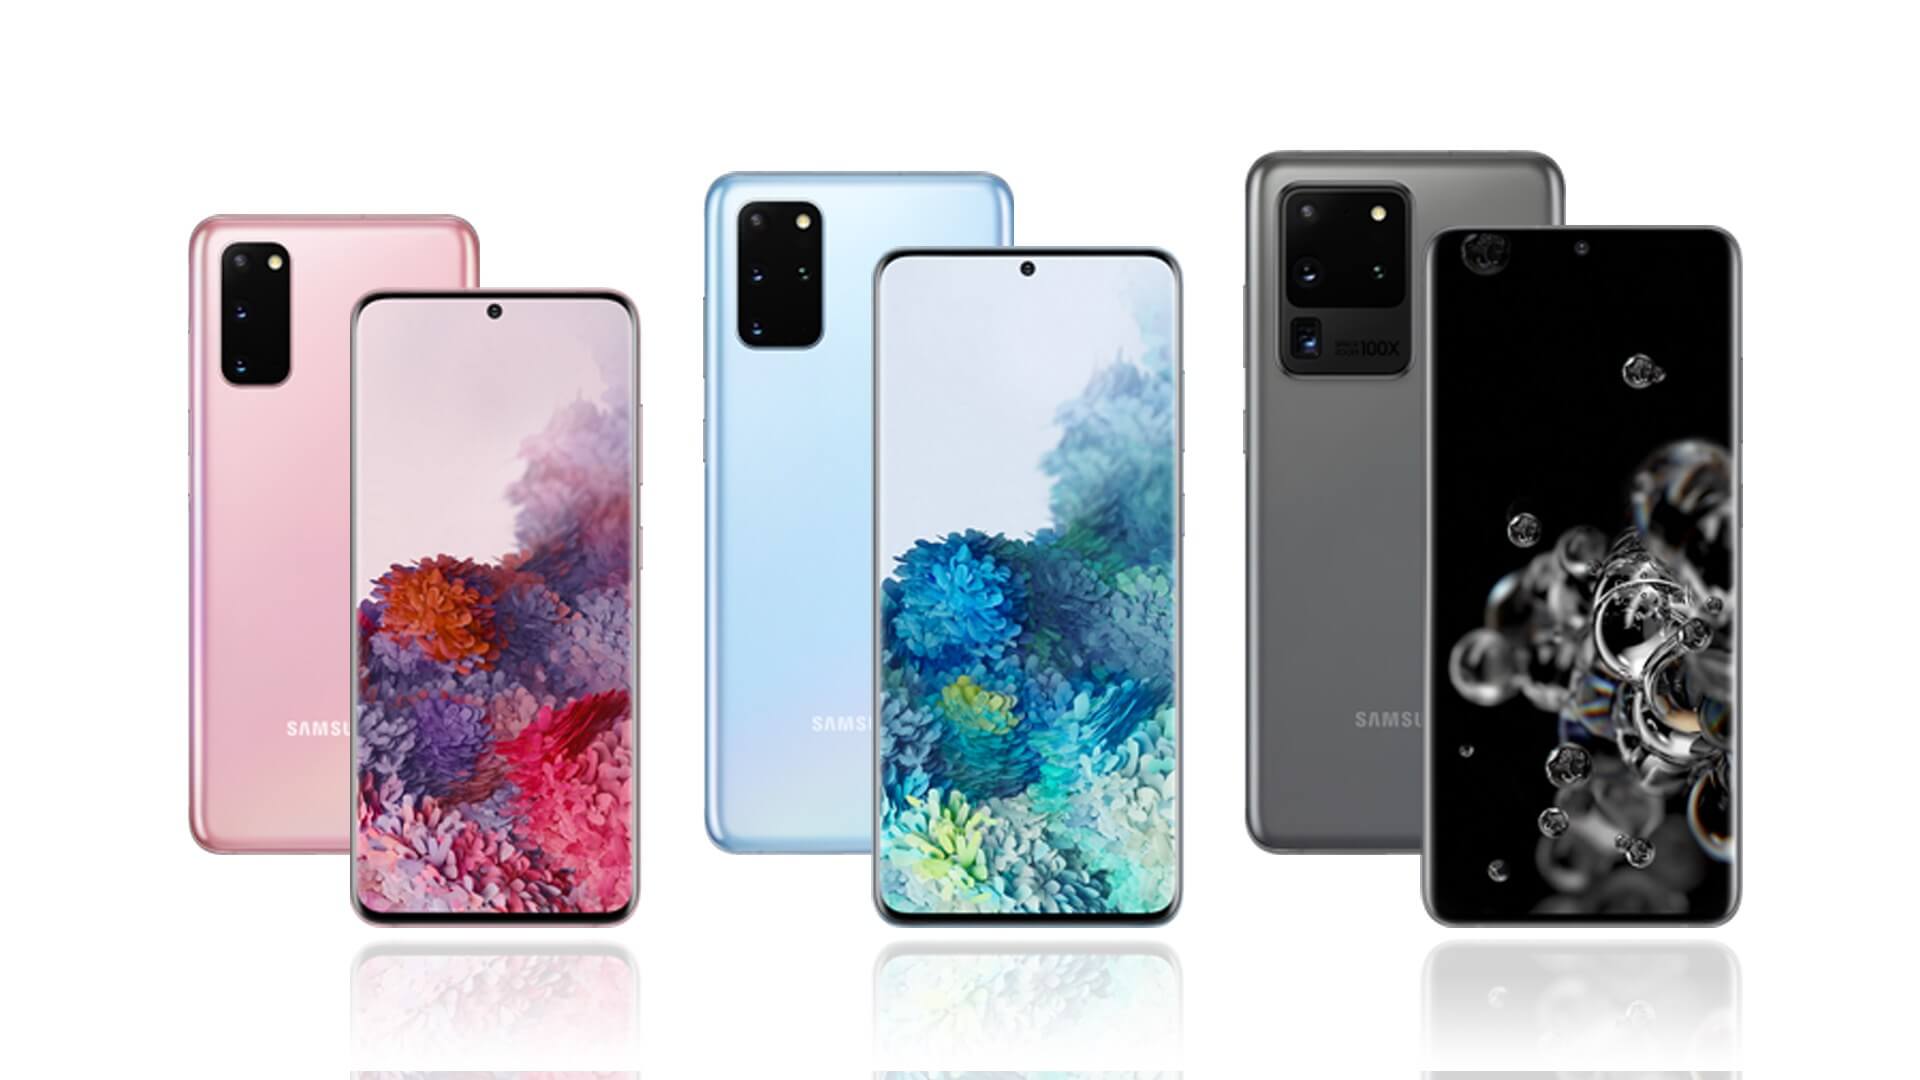 Samsung unveils Galaxy S20 5G lineup with new camera tech, AI, security, and more starting at $1,000 3